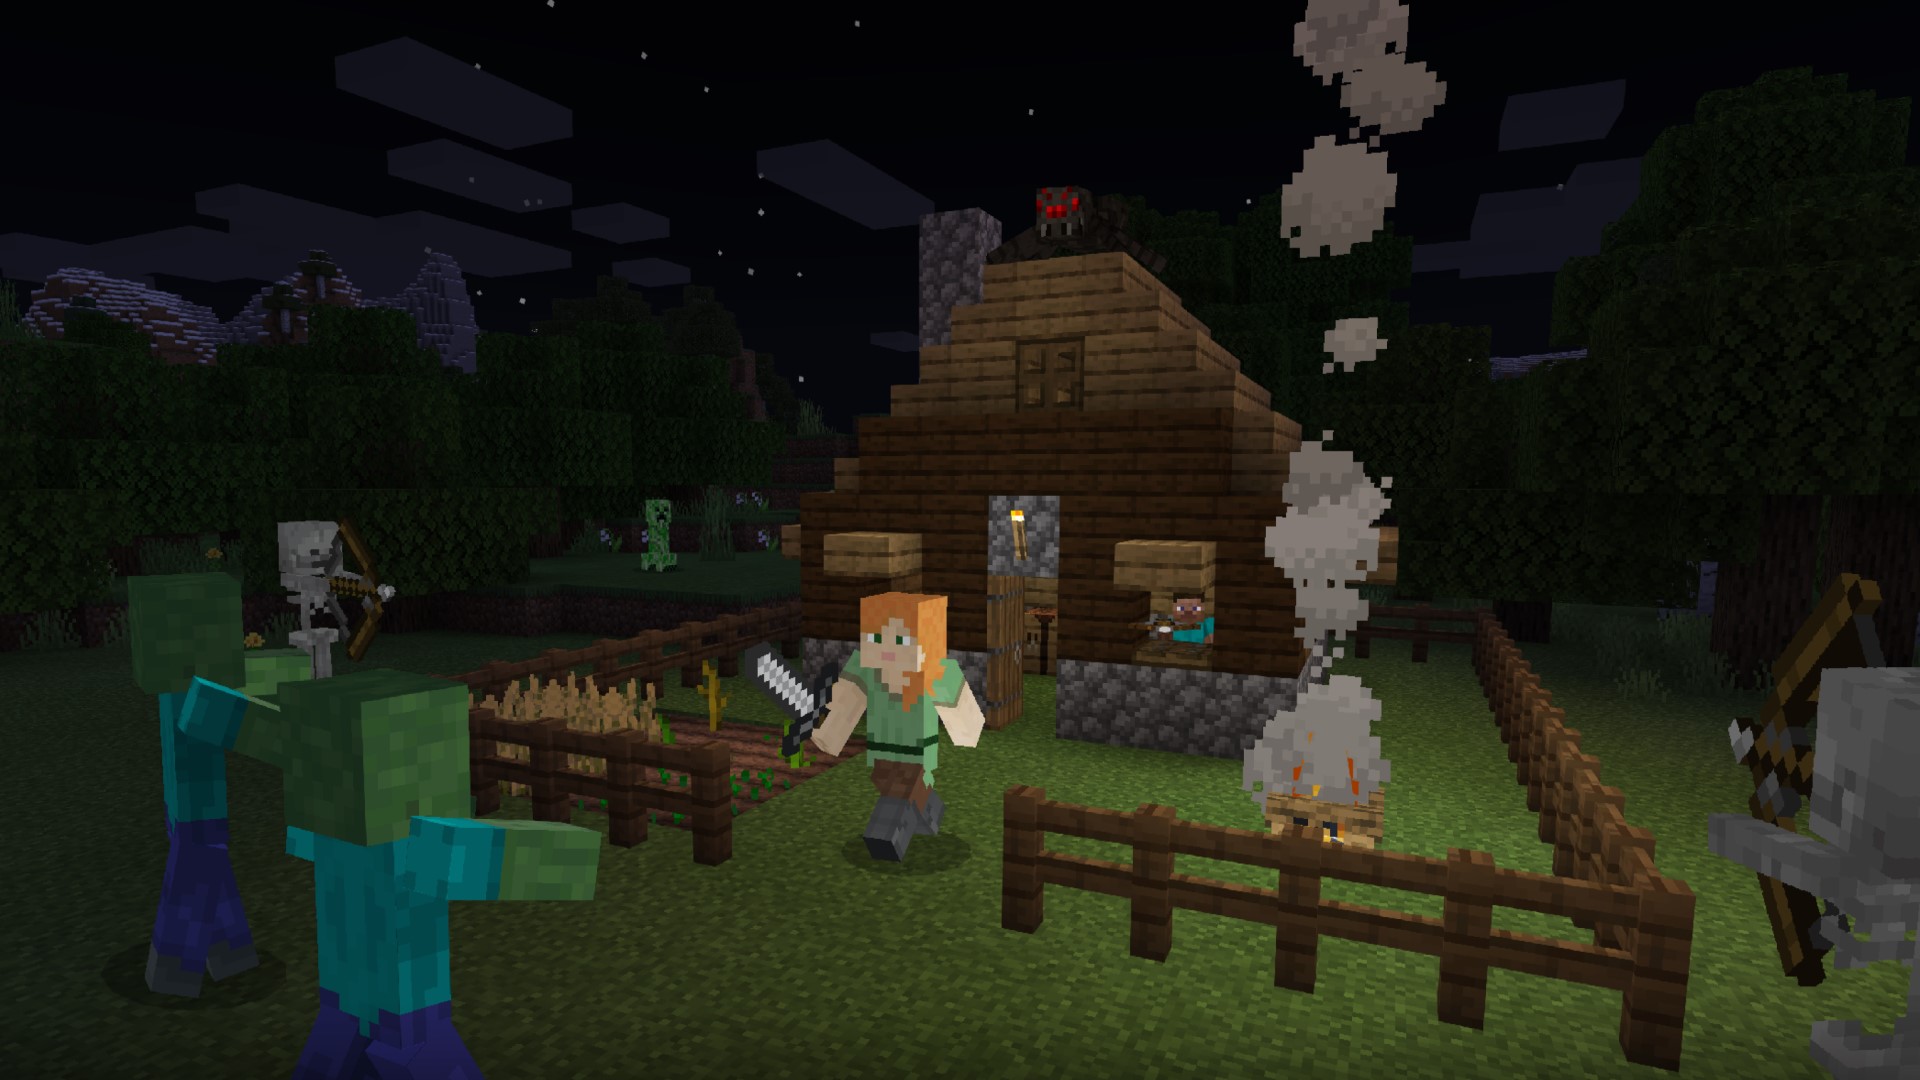 Minecraft download - an avatar leaving a picket fence house to go into the night and fight zombies outside the house